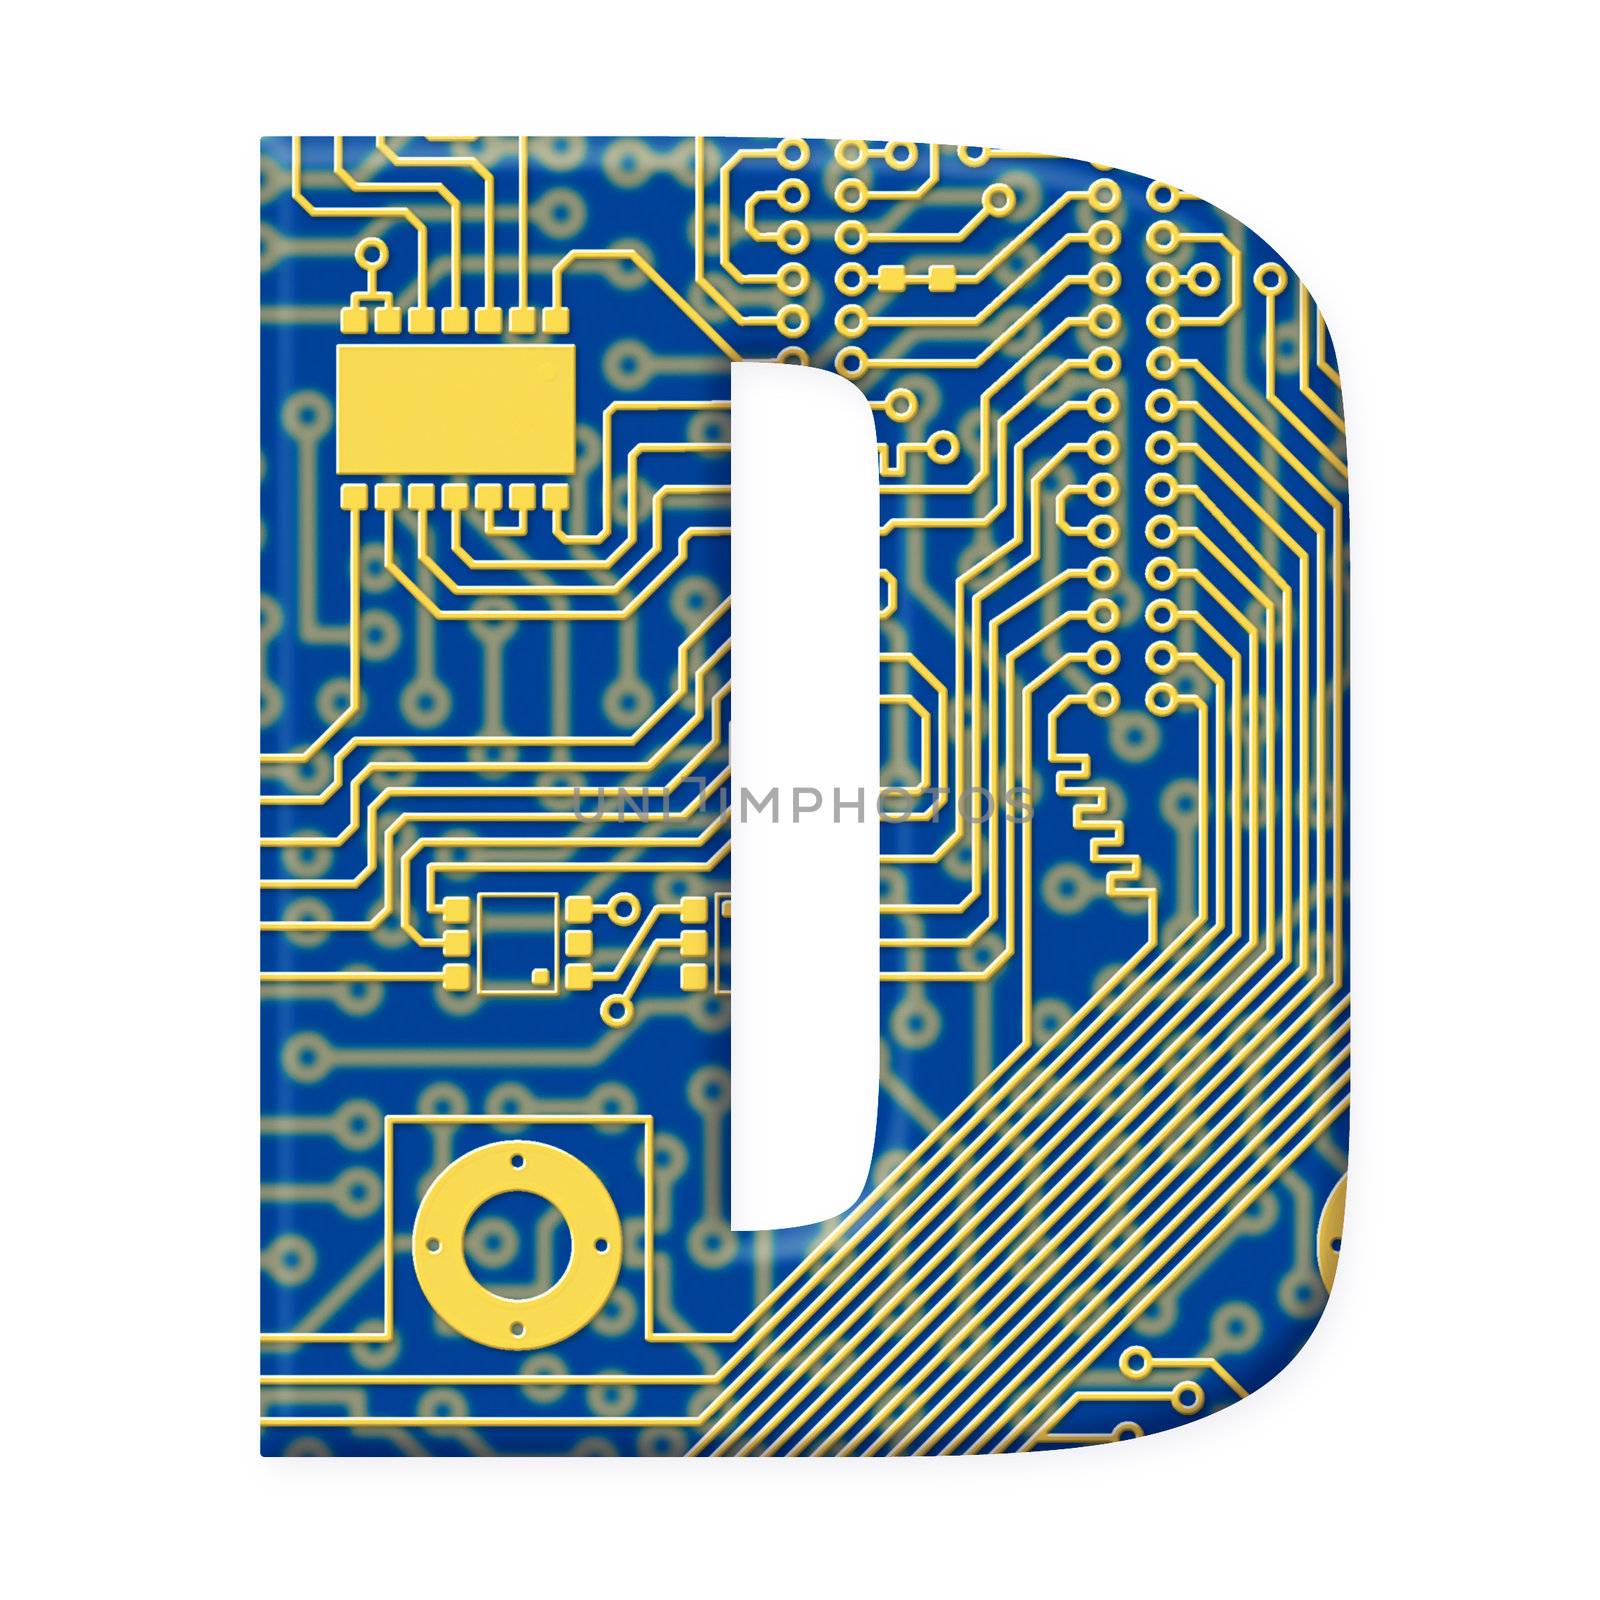 One letter from the electronic technology circuit board alphabet on a white background - D